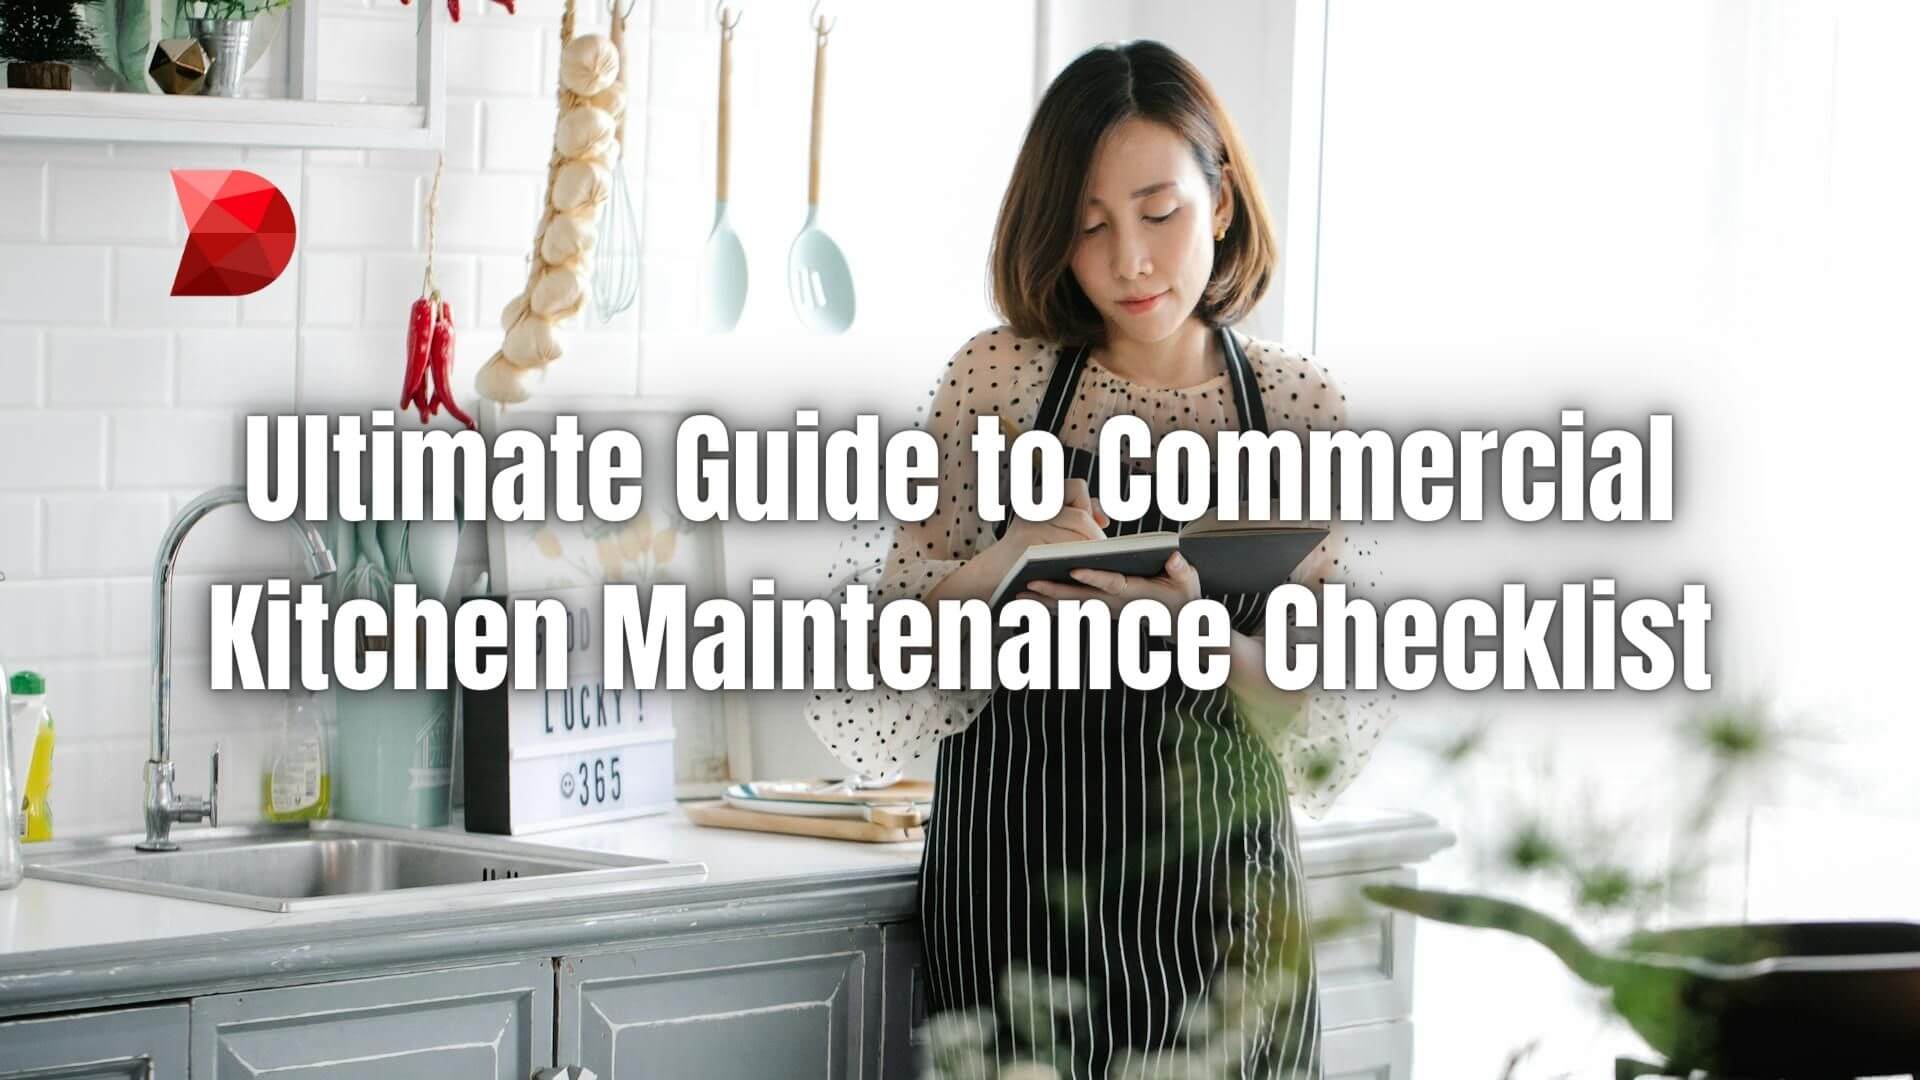 Empower your team with our thorough commercial kitchen maintenance checklist. Learn how to enhance safety, hygiene, and efficiency today!